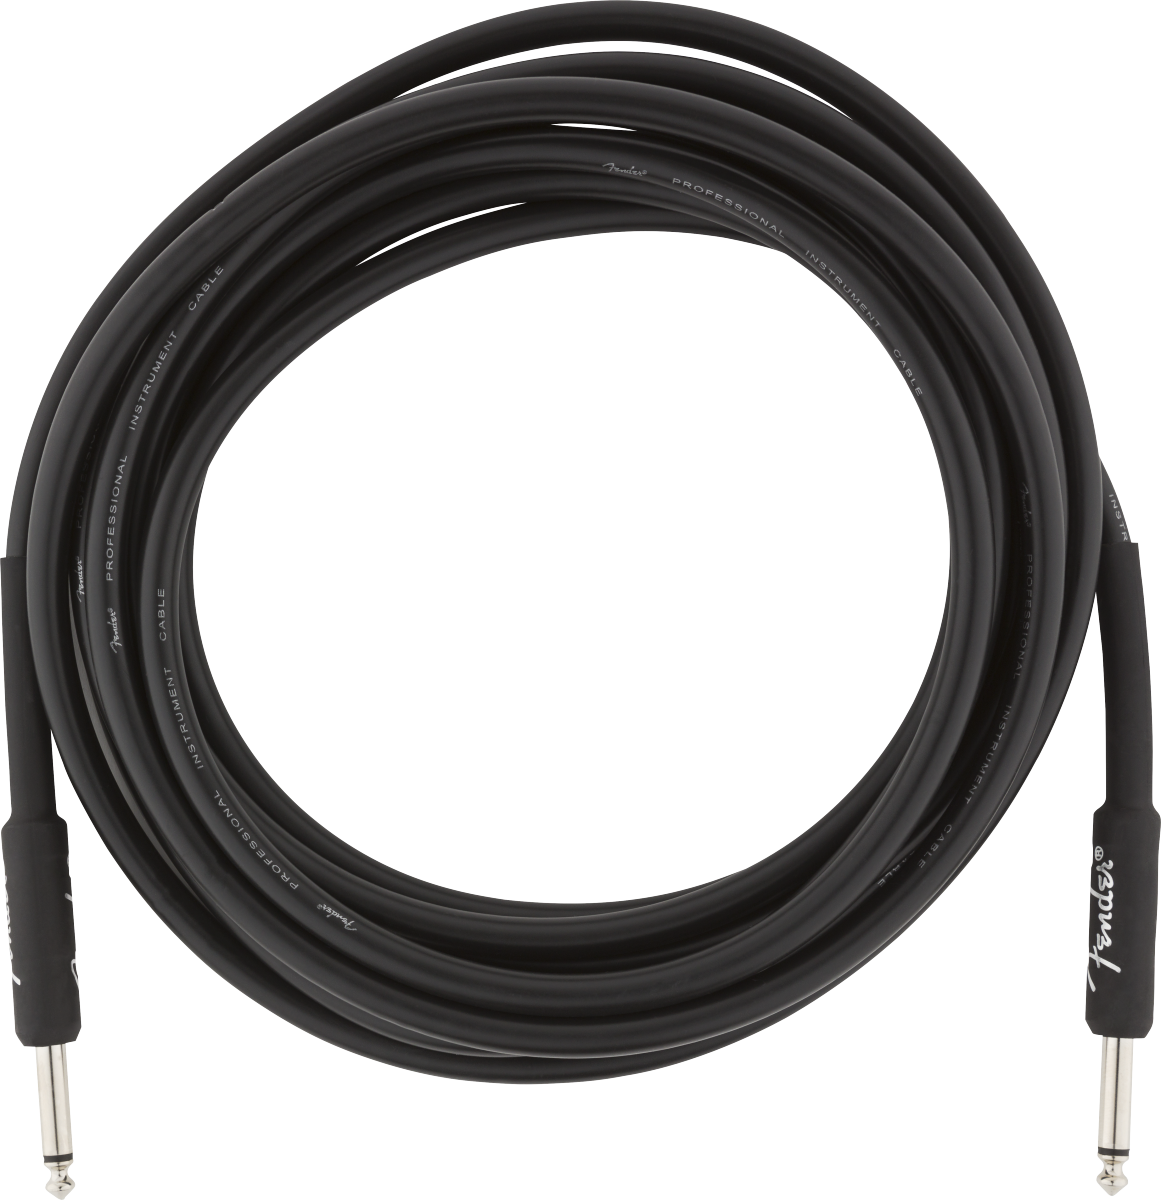 FENDER Professional Series Instrument Cable, Straight-Straight, 15', Black (0990820021)